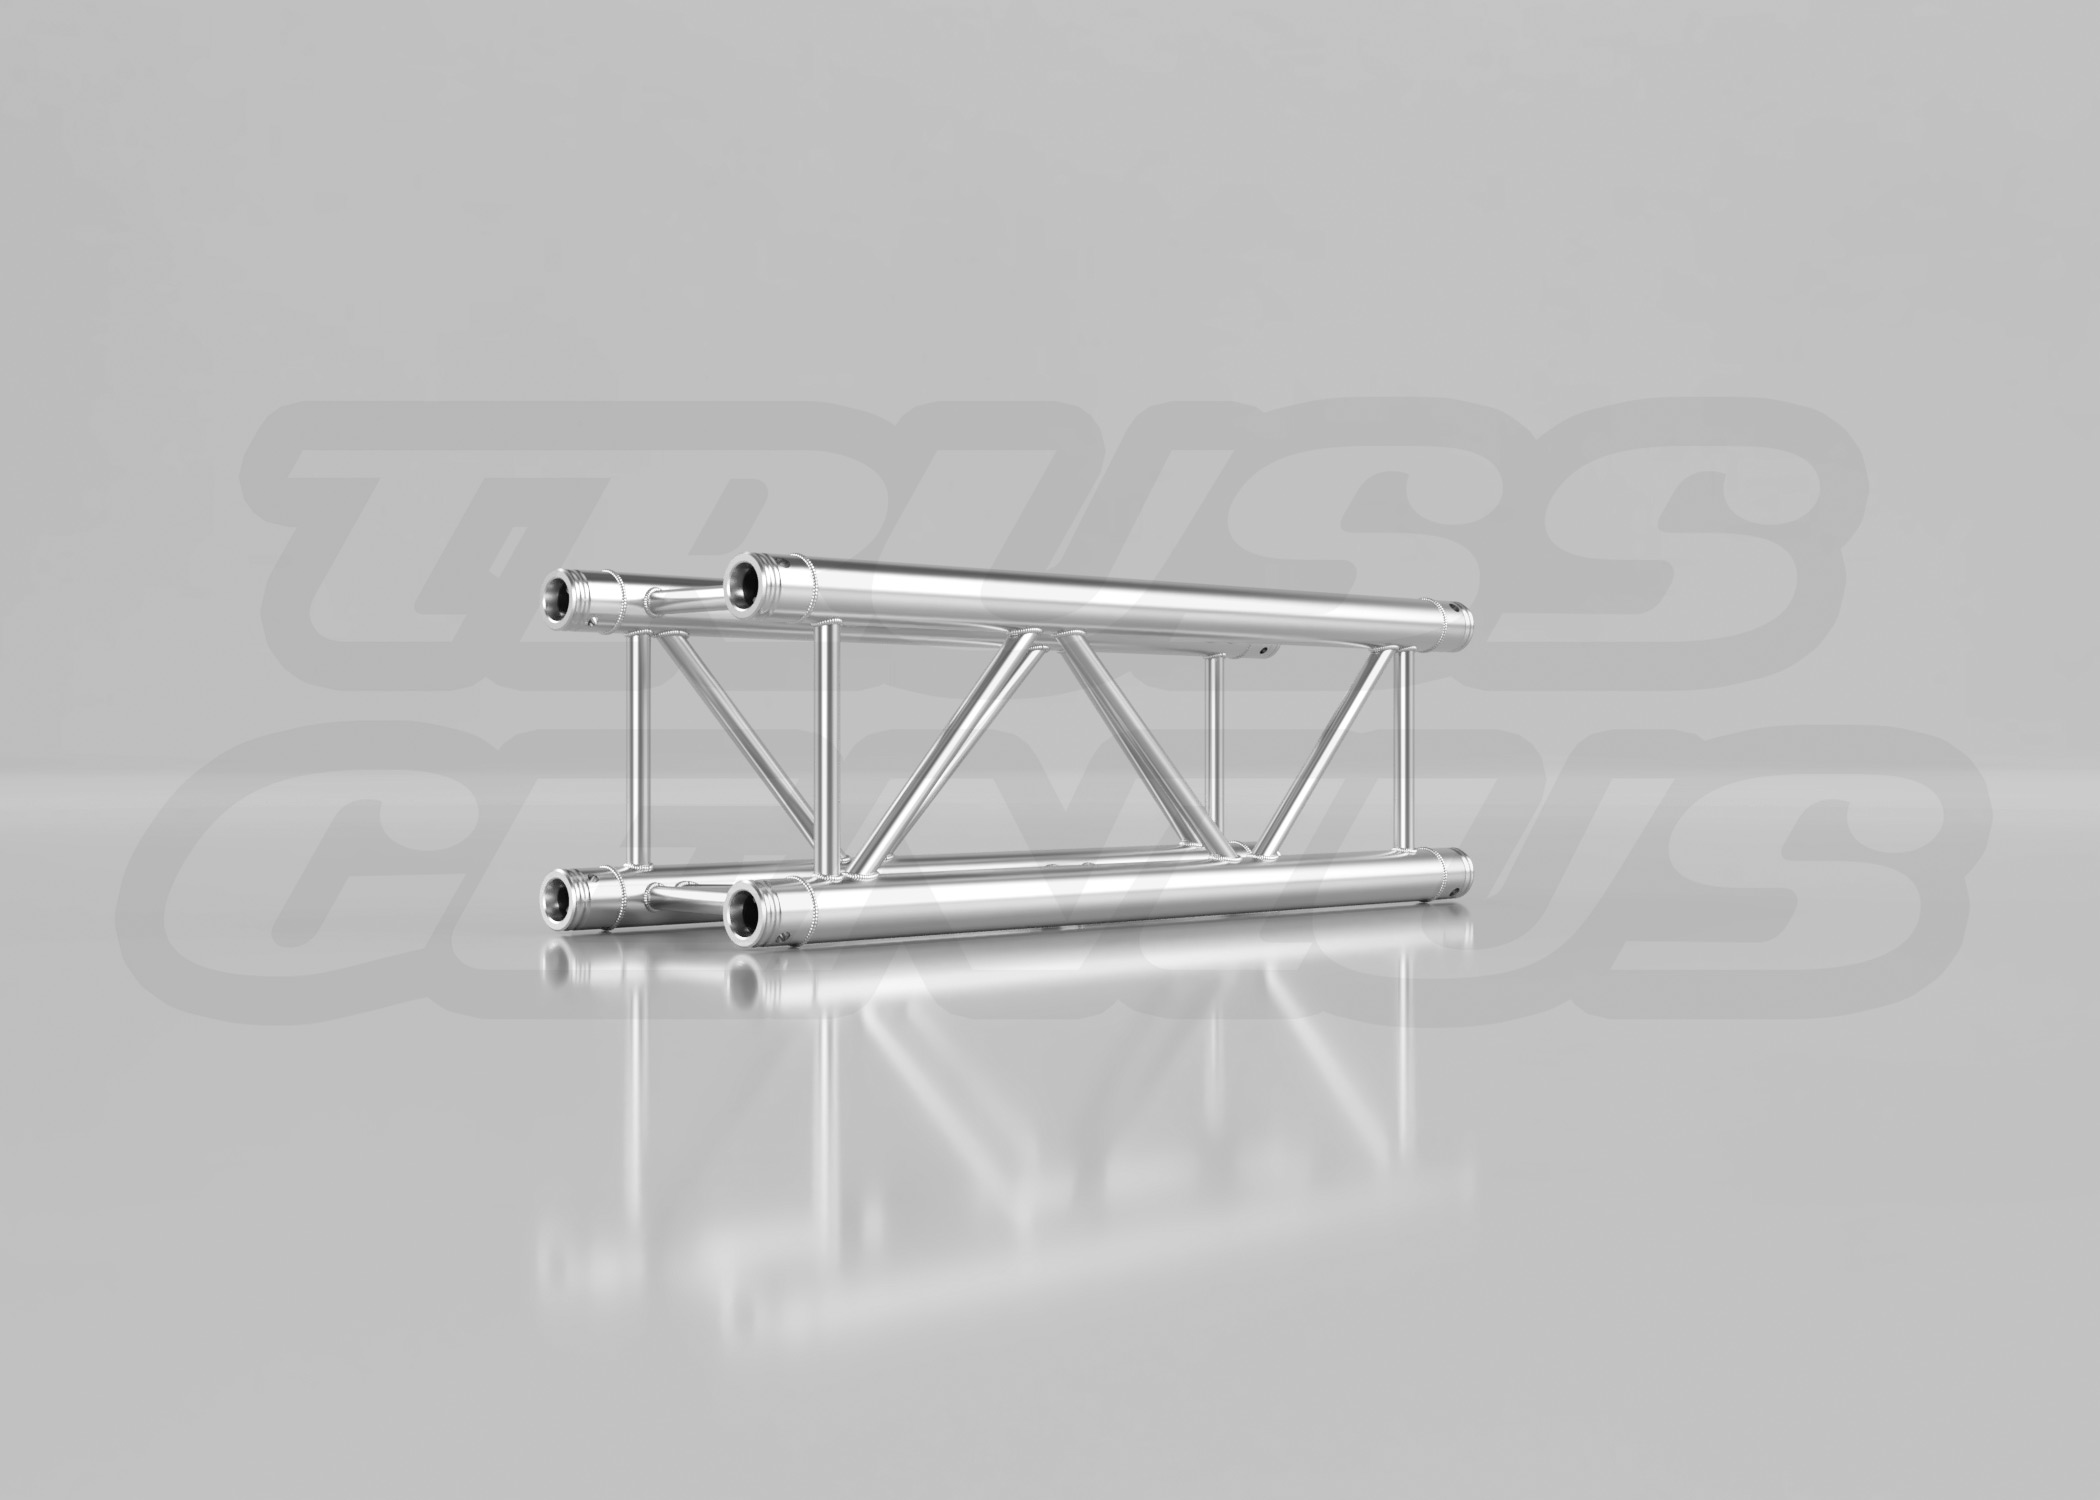 EVT290S-0875 ⋆ 2.87-Foot / 0.875-Meter Square Truss Straight Section